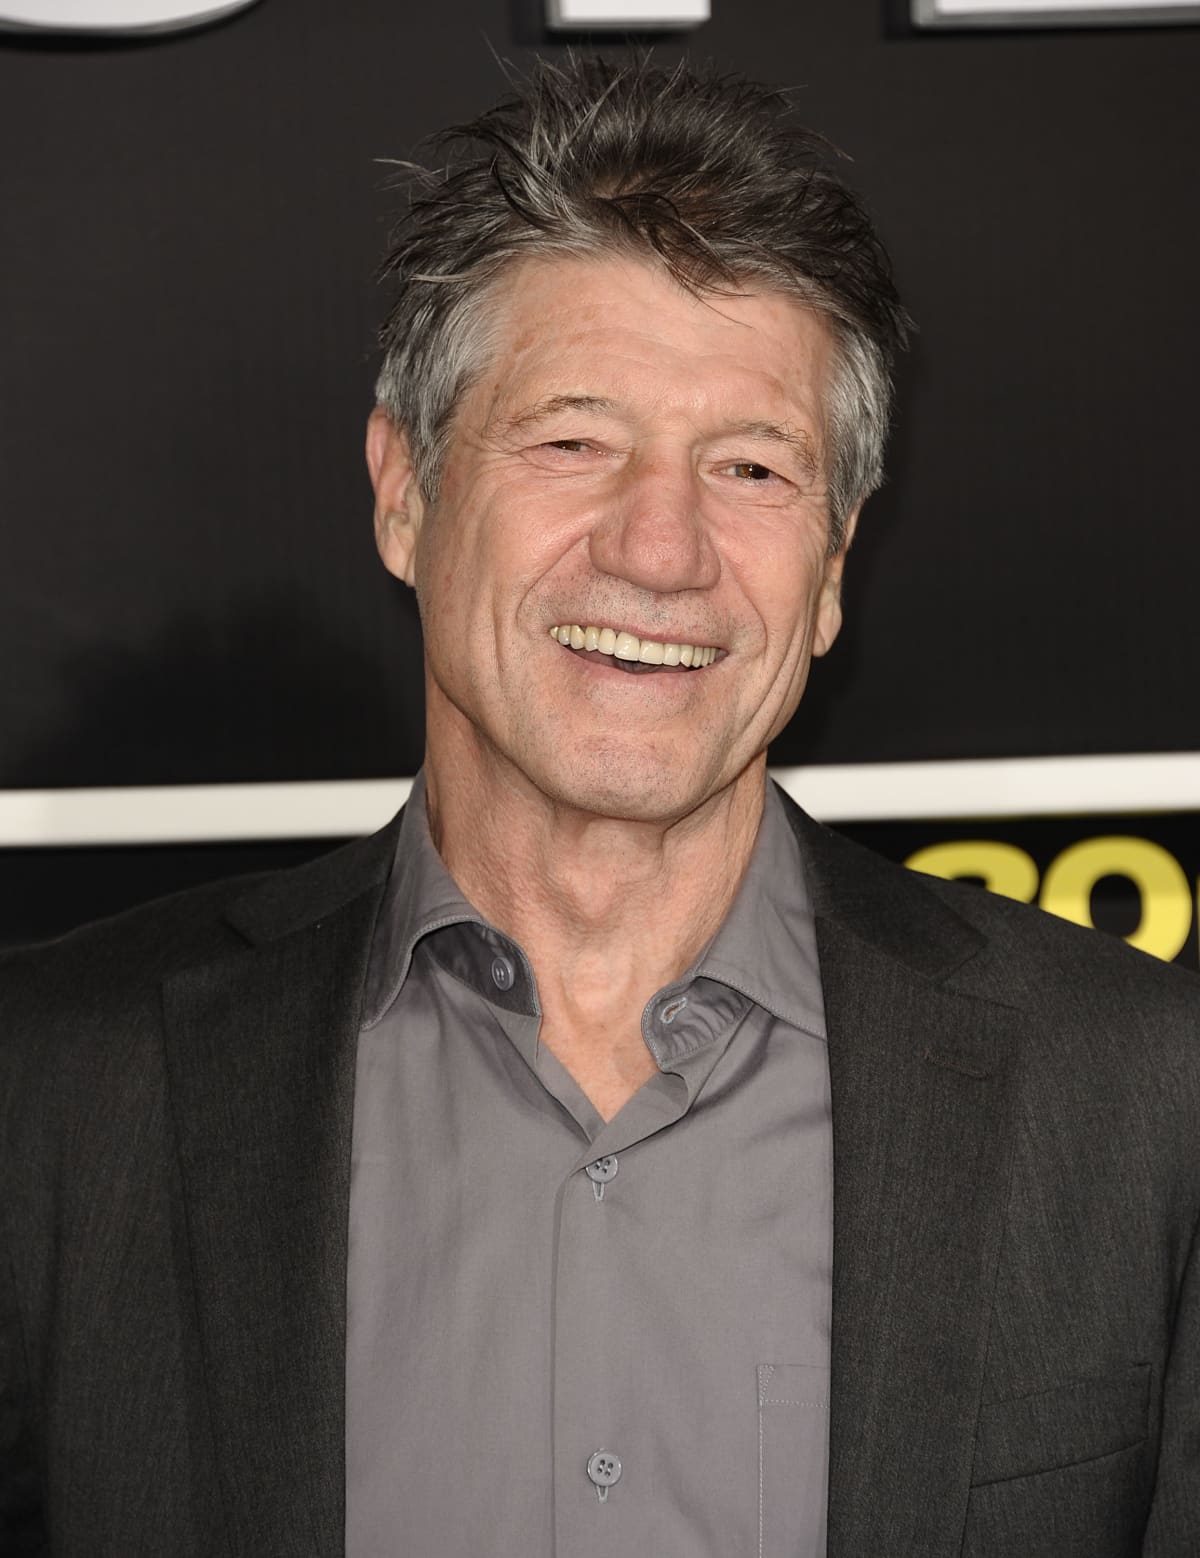 HOLLYWOOD, CA - AUGUST 08:  Actor Fred Ward attends the premiere of "30 Minutes or Less" at Grauman's Chinese Theatre on August 8, 2011 in Hollywood, California.  (Photo by Jason LaVeris/FilmMagic)